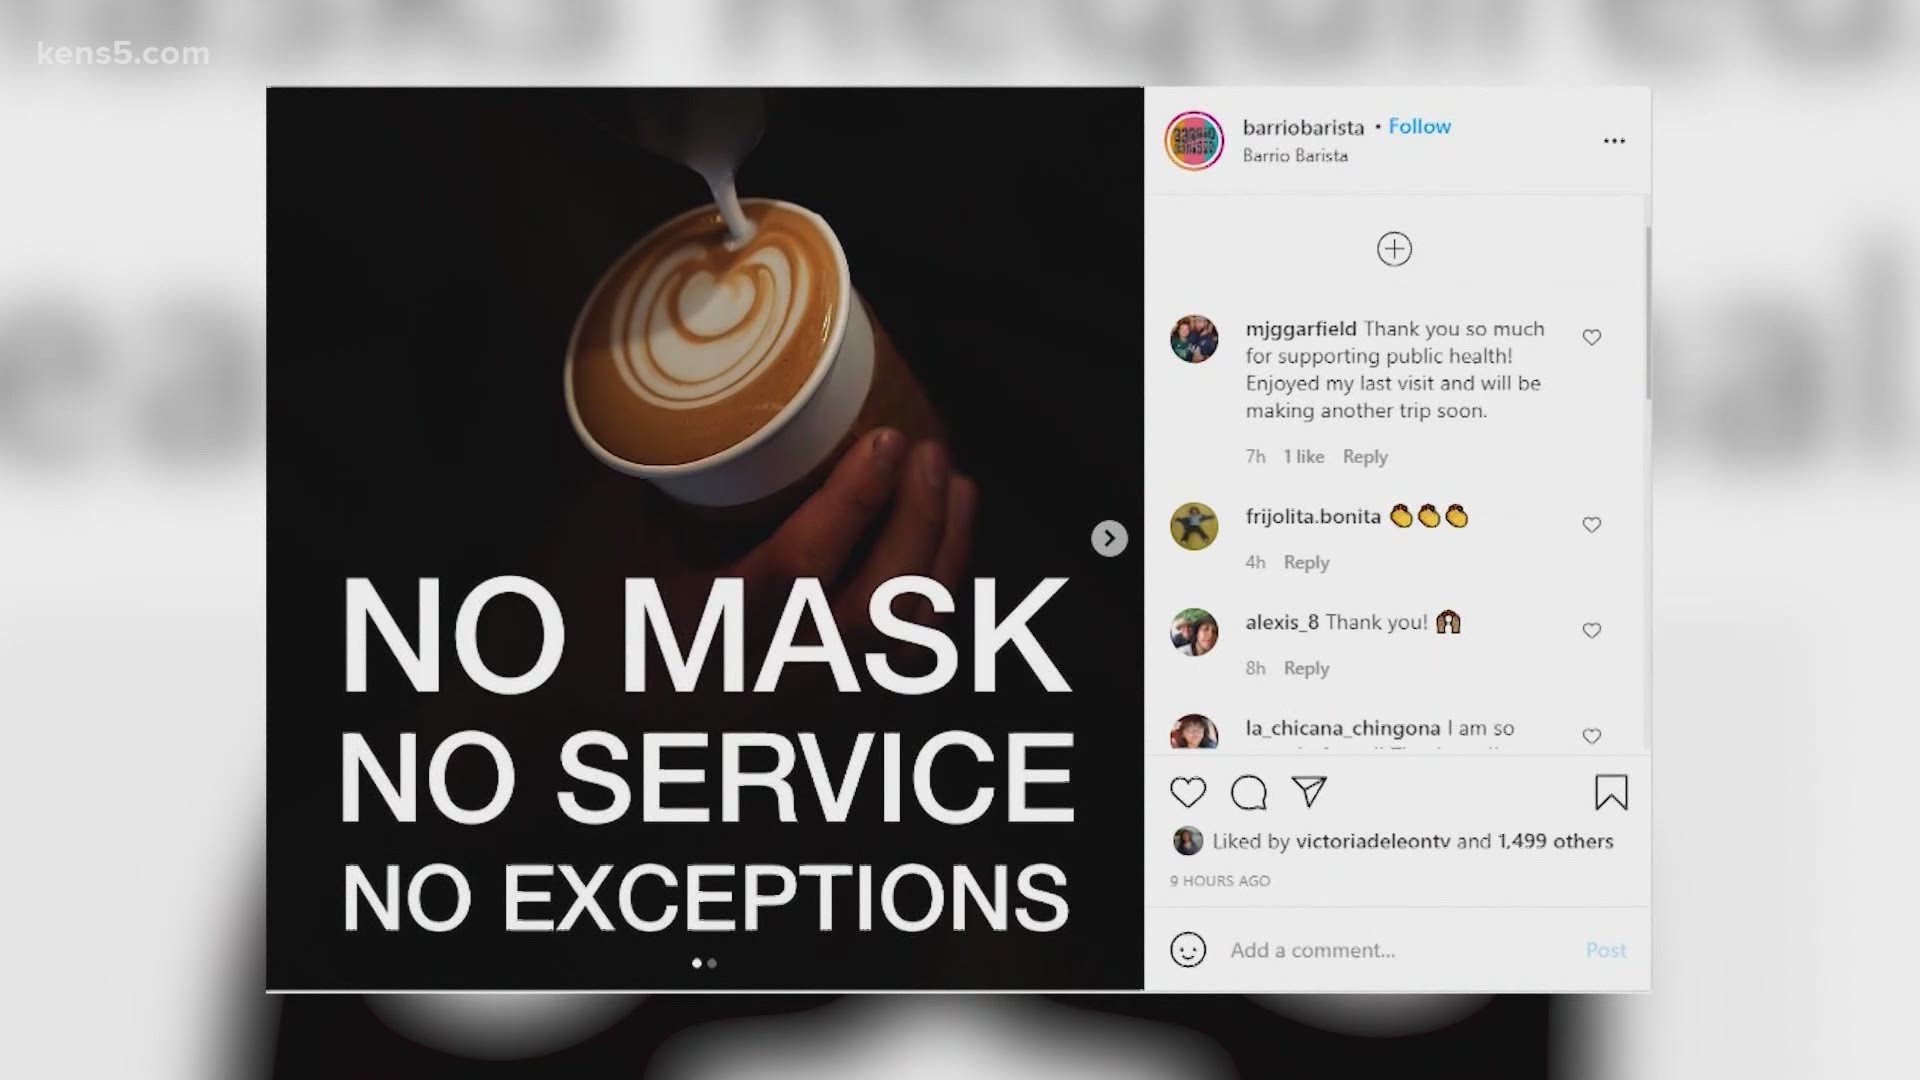 Businesses have the right to set their own mask requirement and deny service based on it. If someone refuses to leave, the police could arrest them for trespassing.